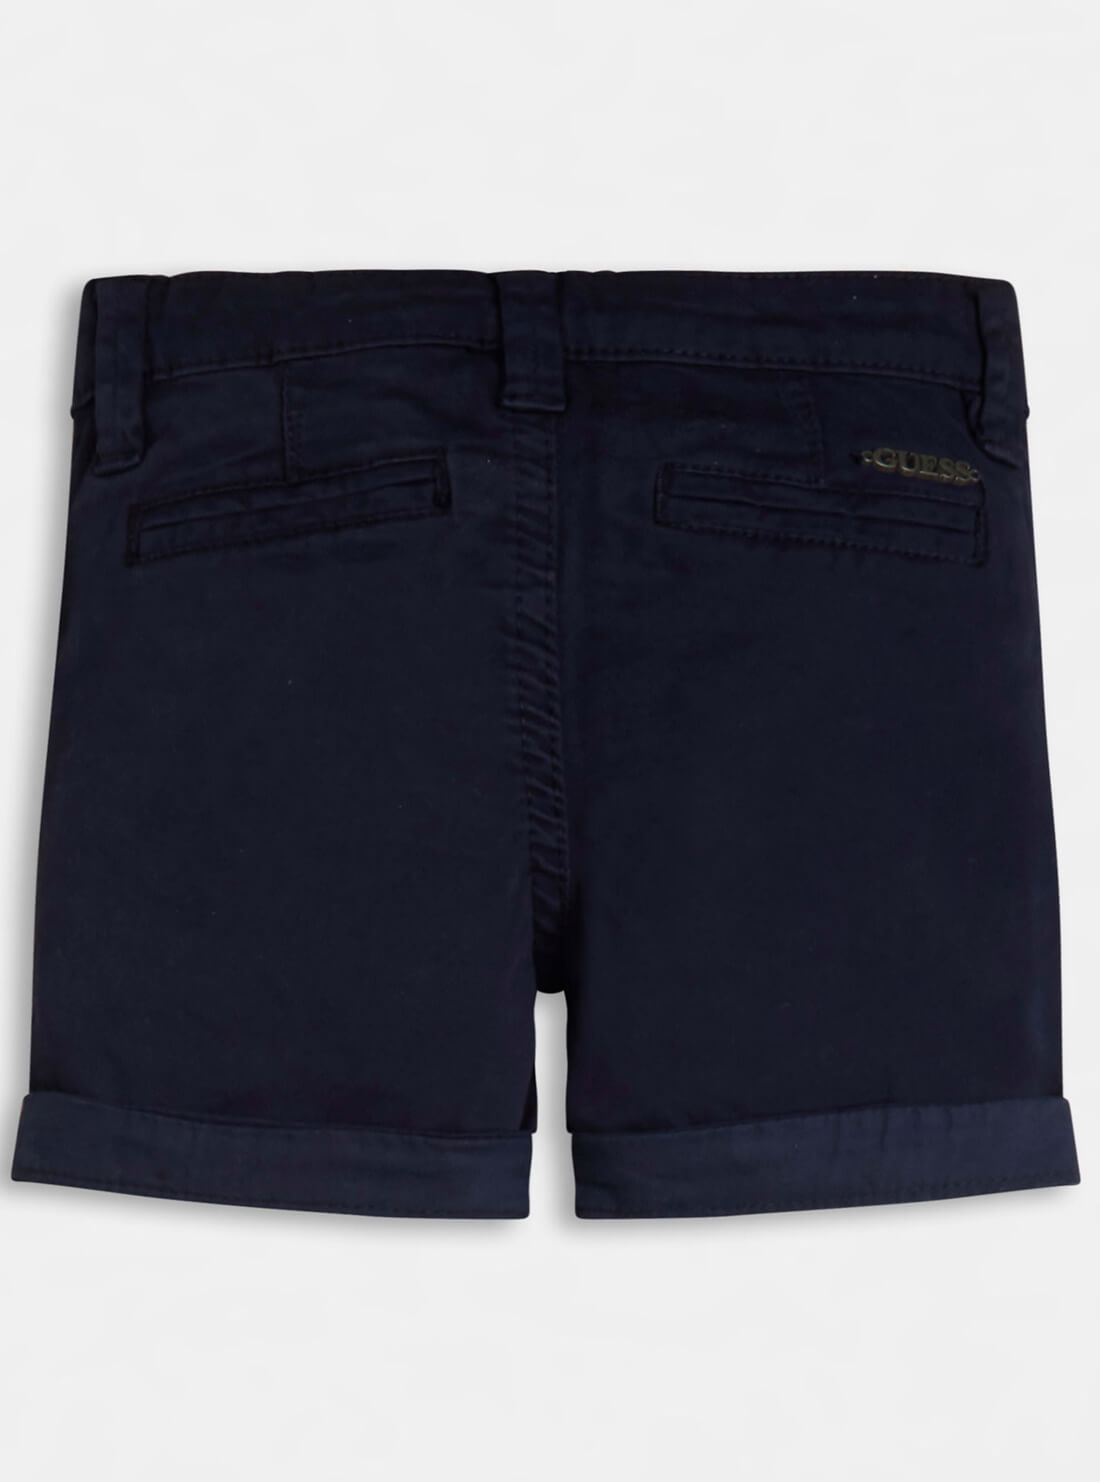 GUESS Kids Baby Boy Navy Blue Regular Fit Chino Shorts (0-24m) I1RD04WD3T0 Back View